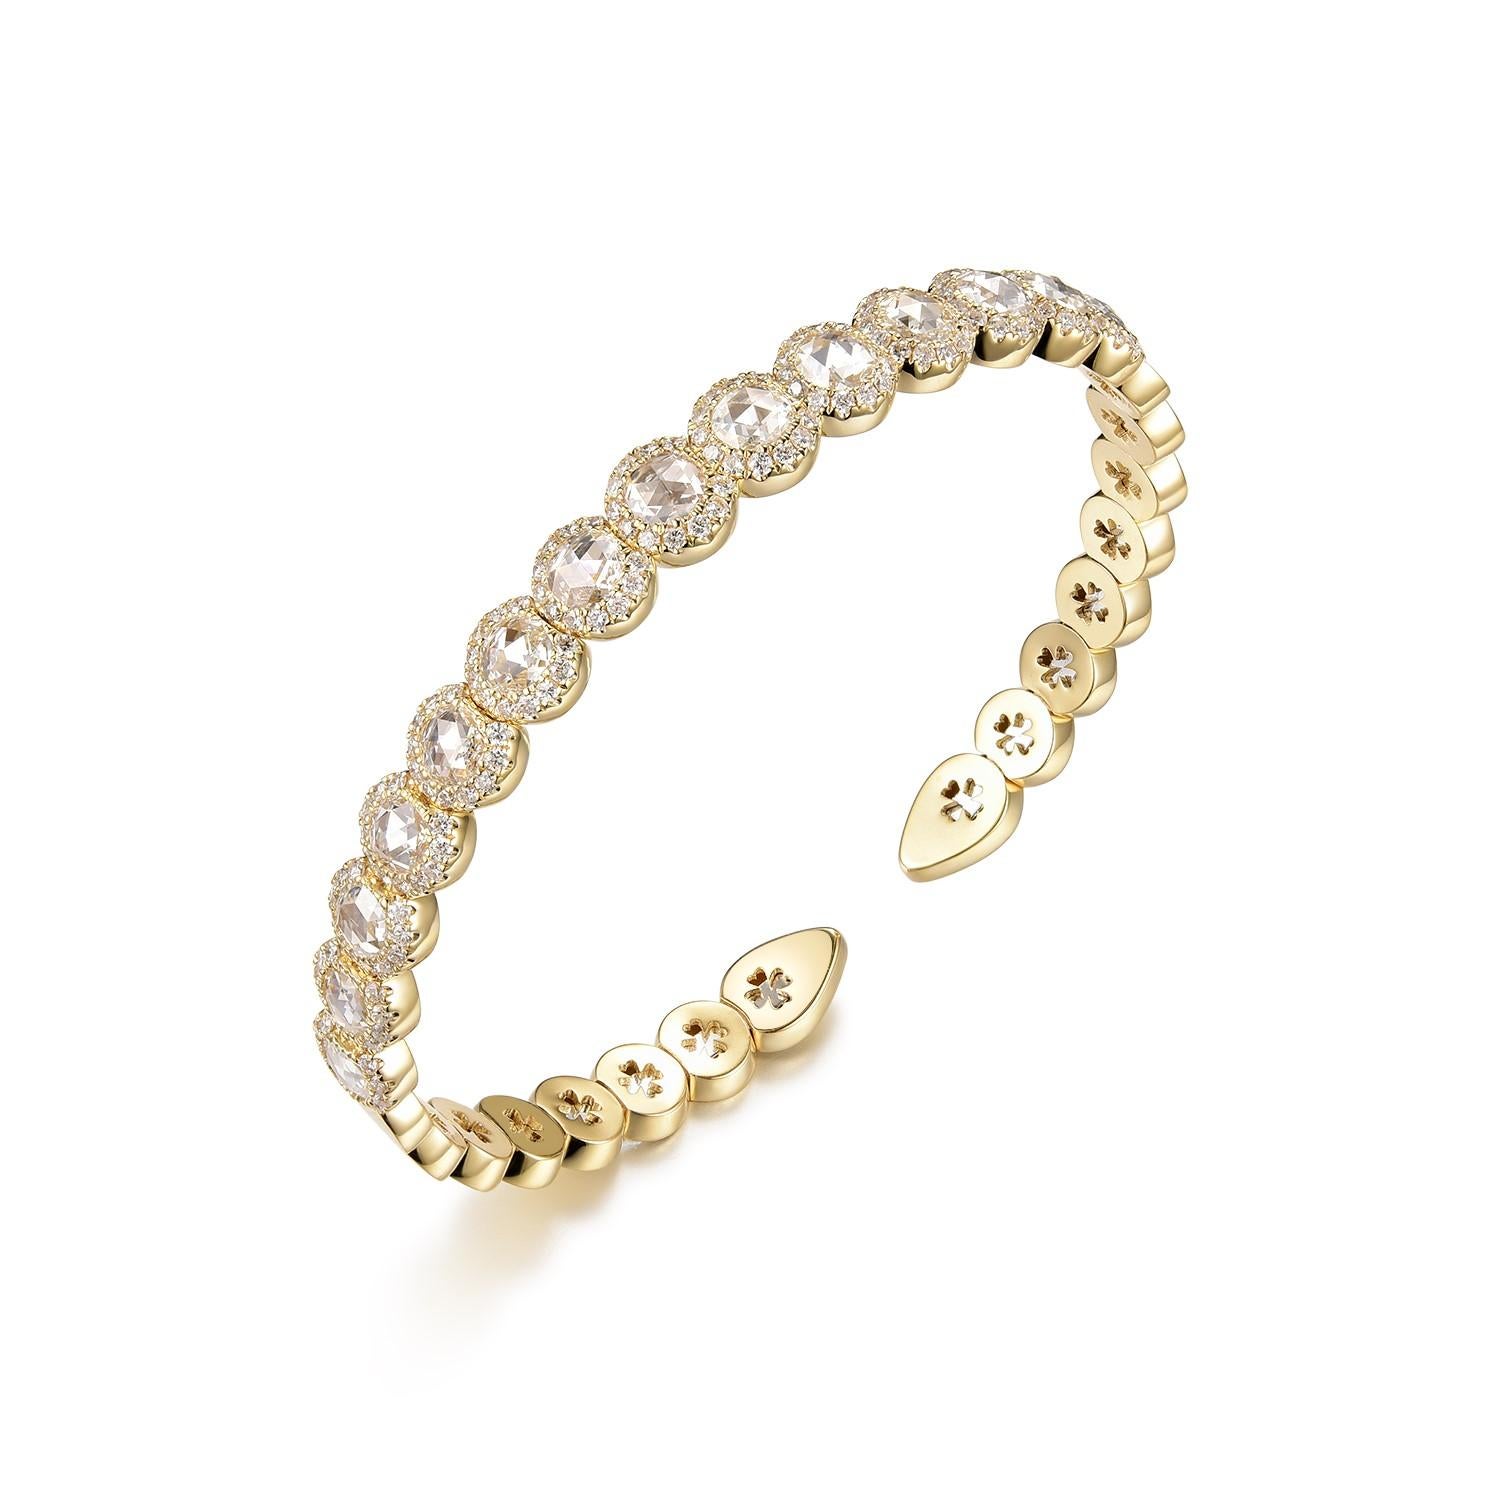 This bracelet is a radiant treasure, meticulously crafted from 18-karat yellow gold. It presents an alluring array of rose cut diamonds, collectively weighing 1.68 carats, their vintage-inspired facets reminiscent of the soft bloom of a rose, giving